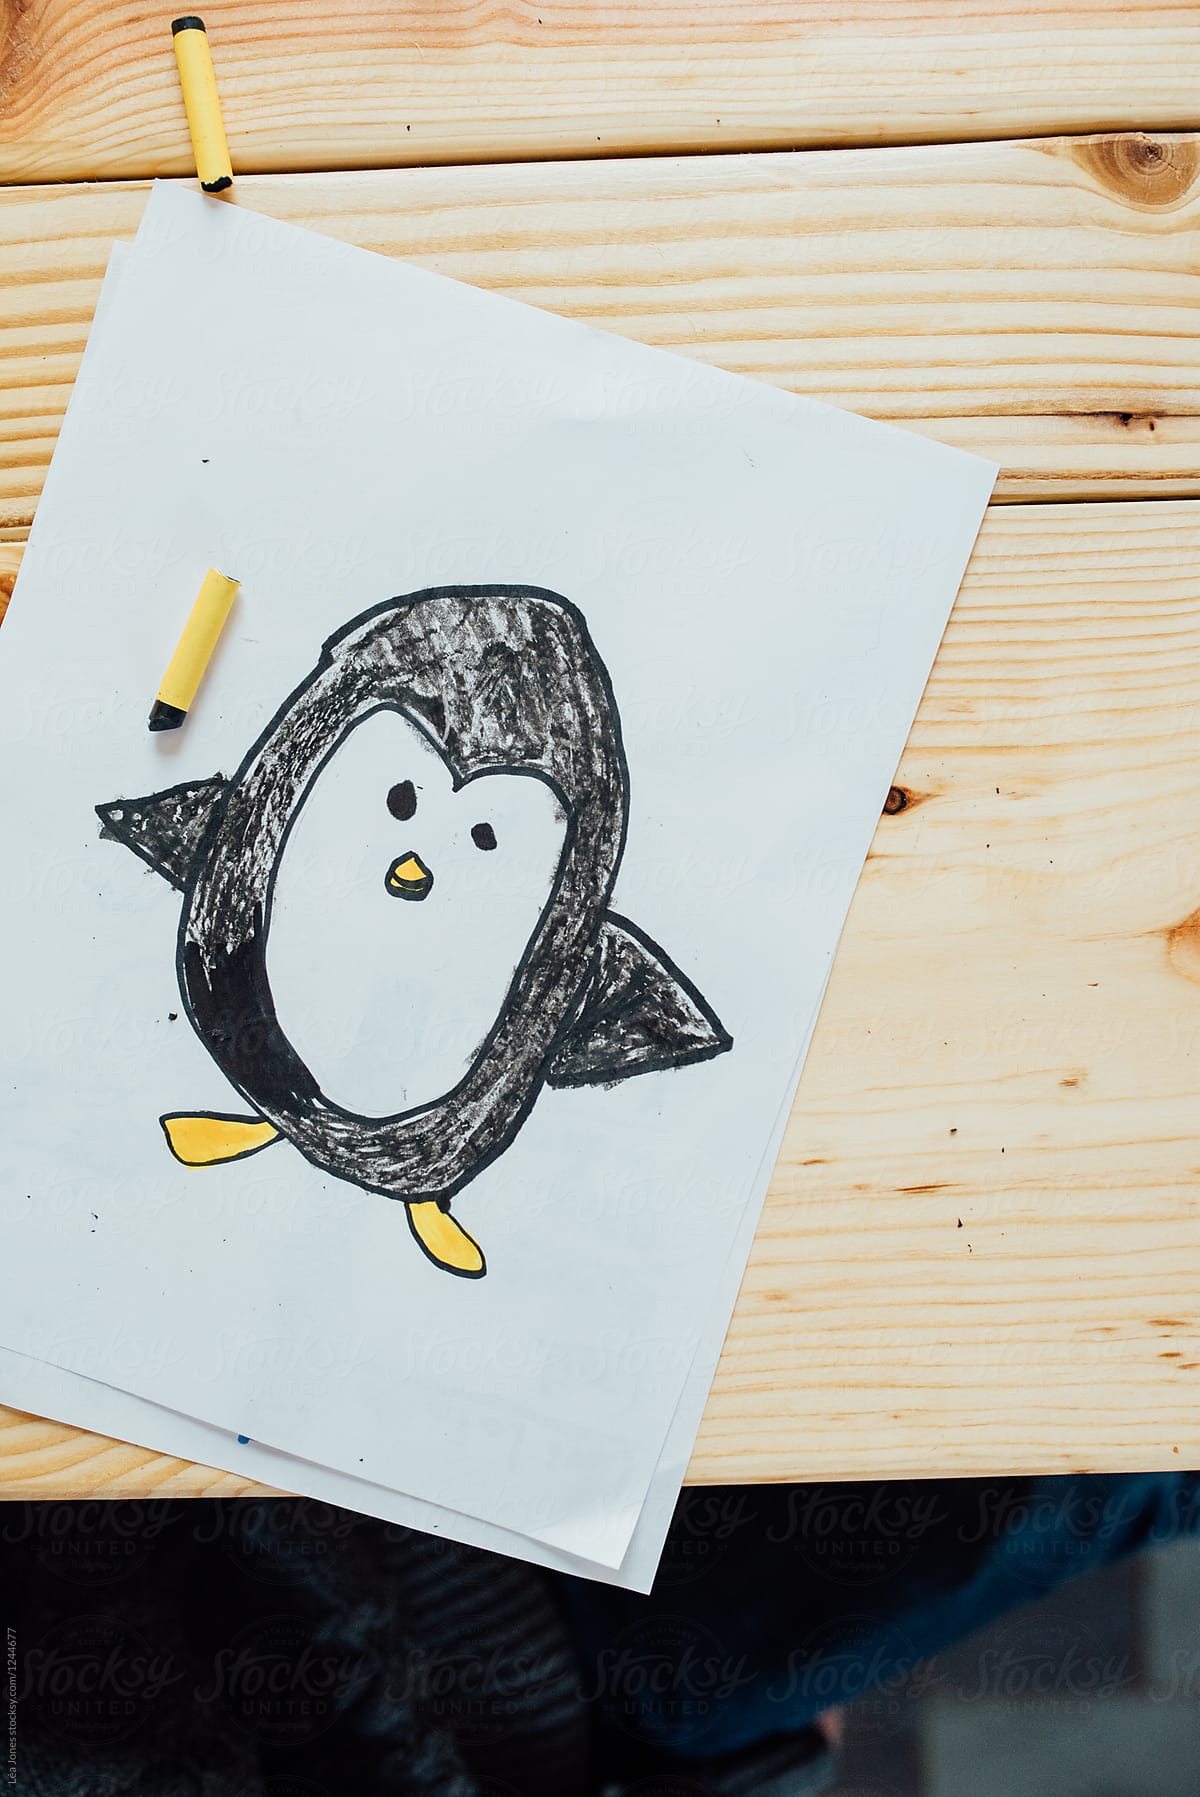 boy drawing a penguin